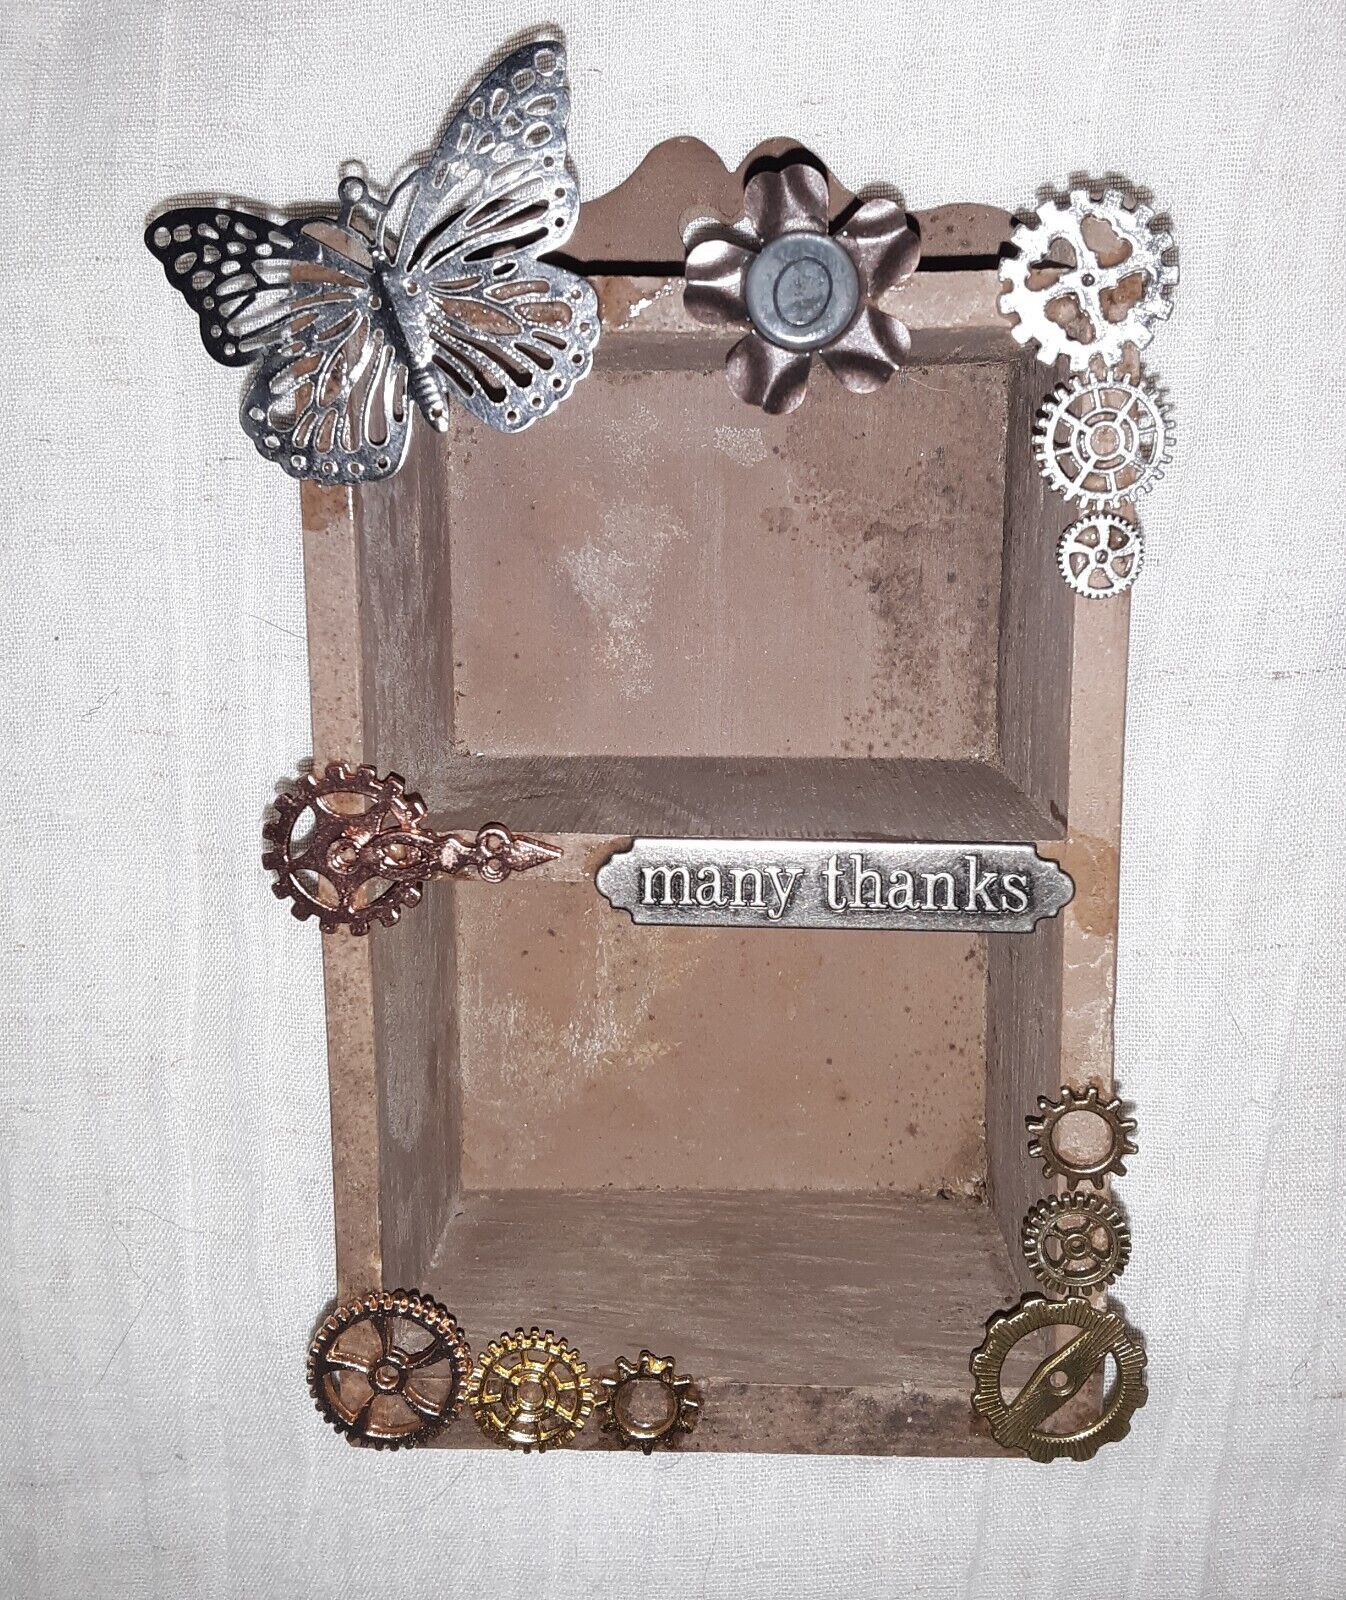 Vintage trinket shelf hand decorated w/a touch of Steampunk decor Brown w/gears